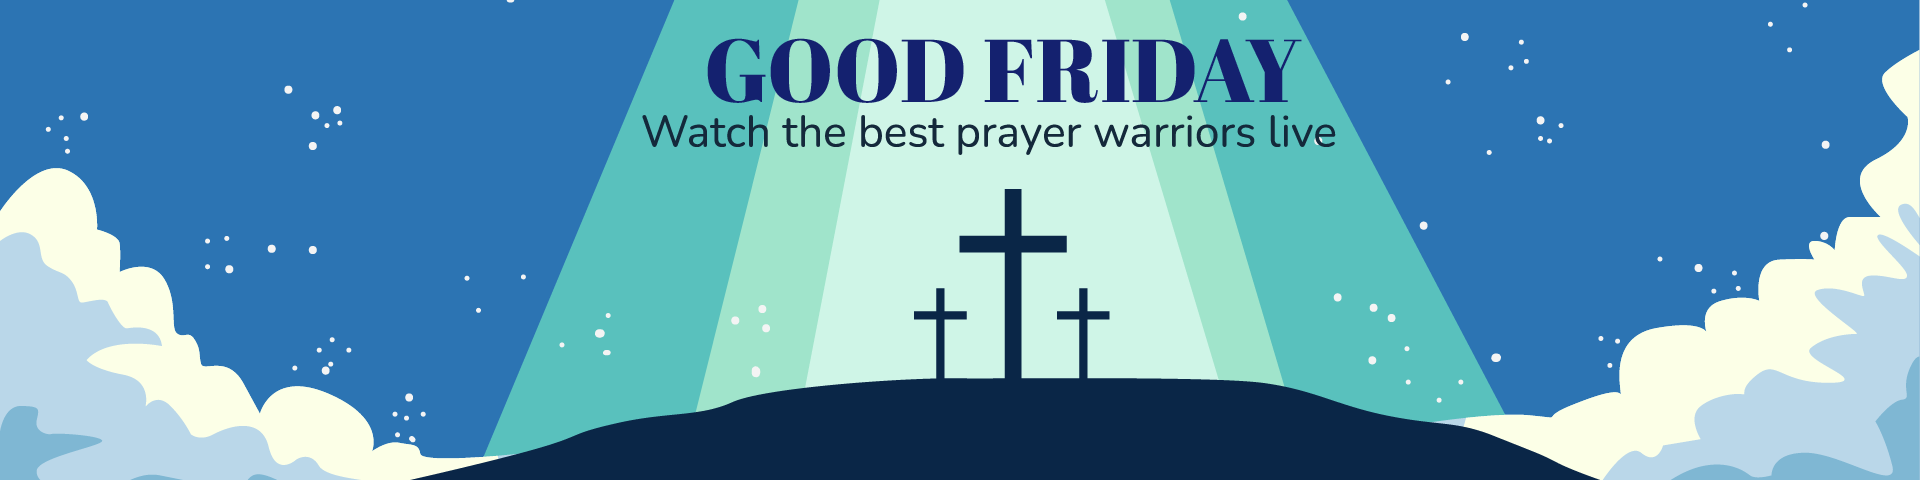 Free Good Friday Twitch Banner